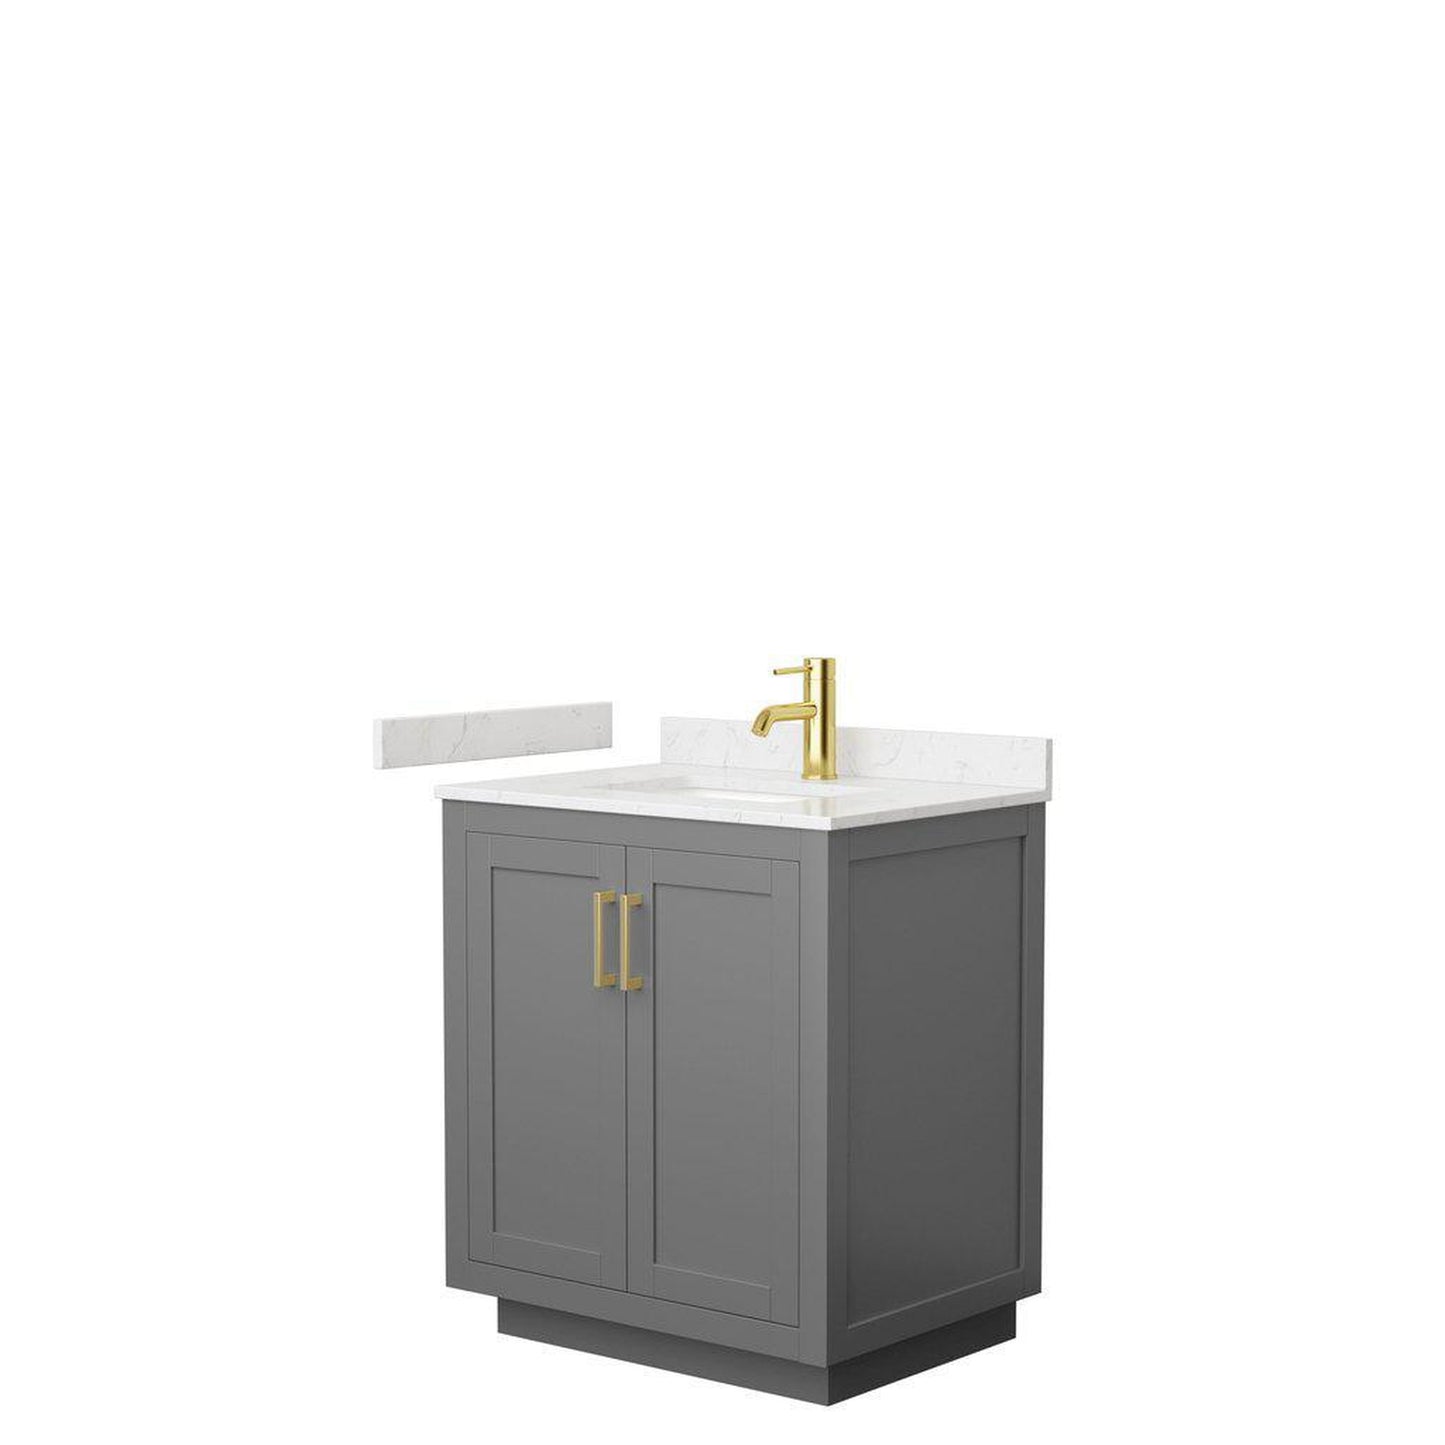 Wyndham Collection Miranda 30" Single Bathroom Dark Gray Vanity Set With Light-Vein Carrara Cultured Marble Countertop, Undermount Square Sink, And Brushed Gold Trim